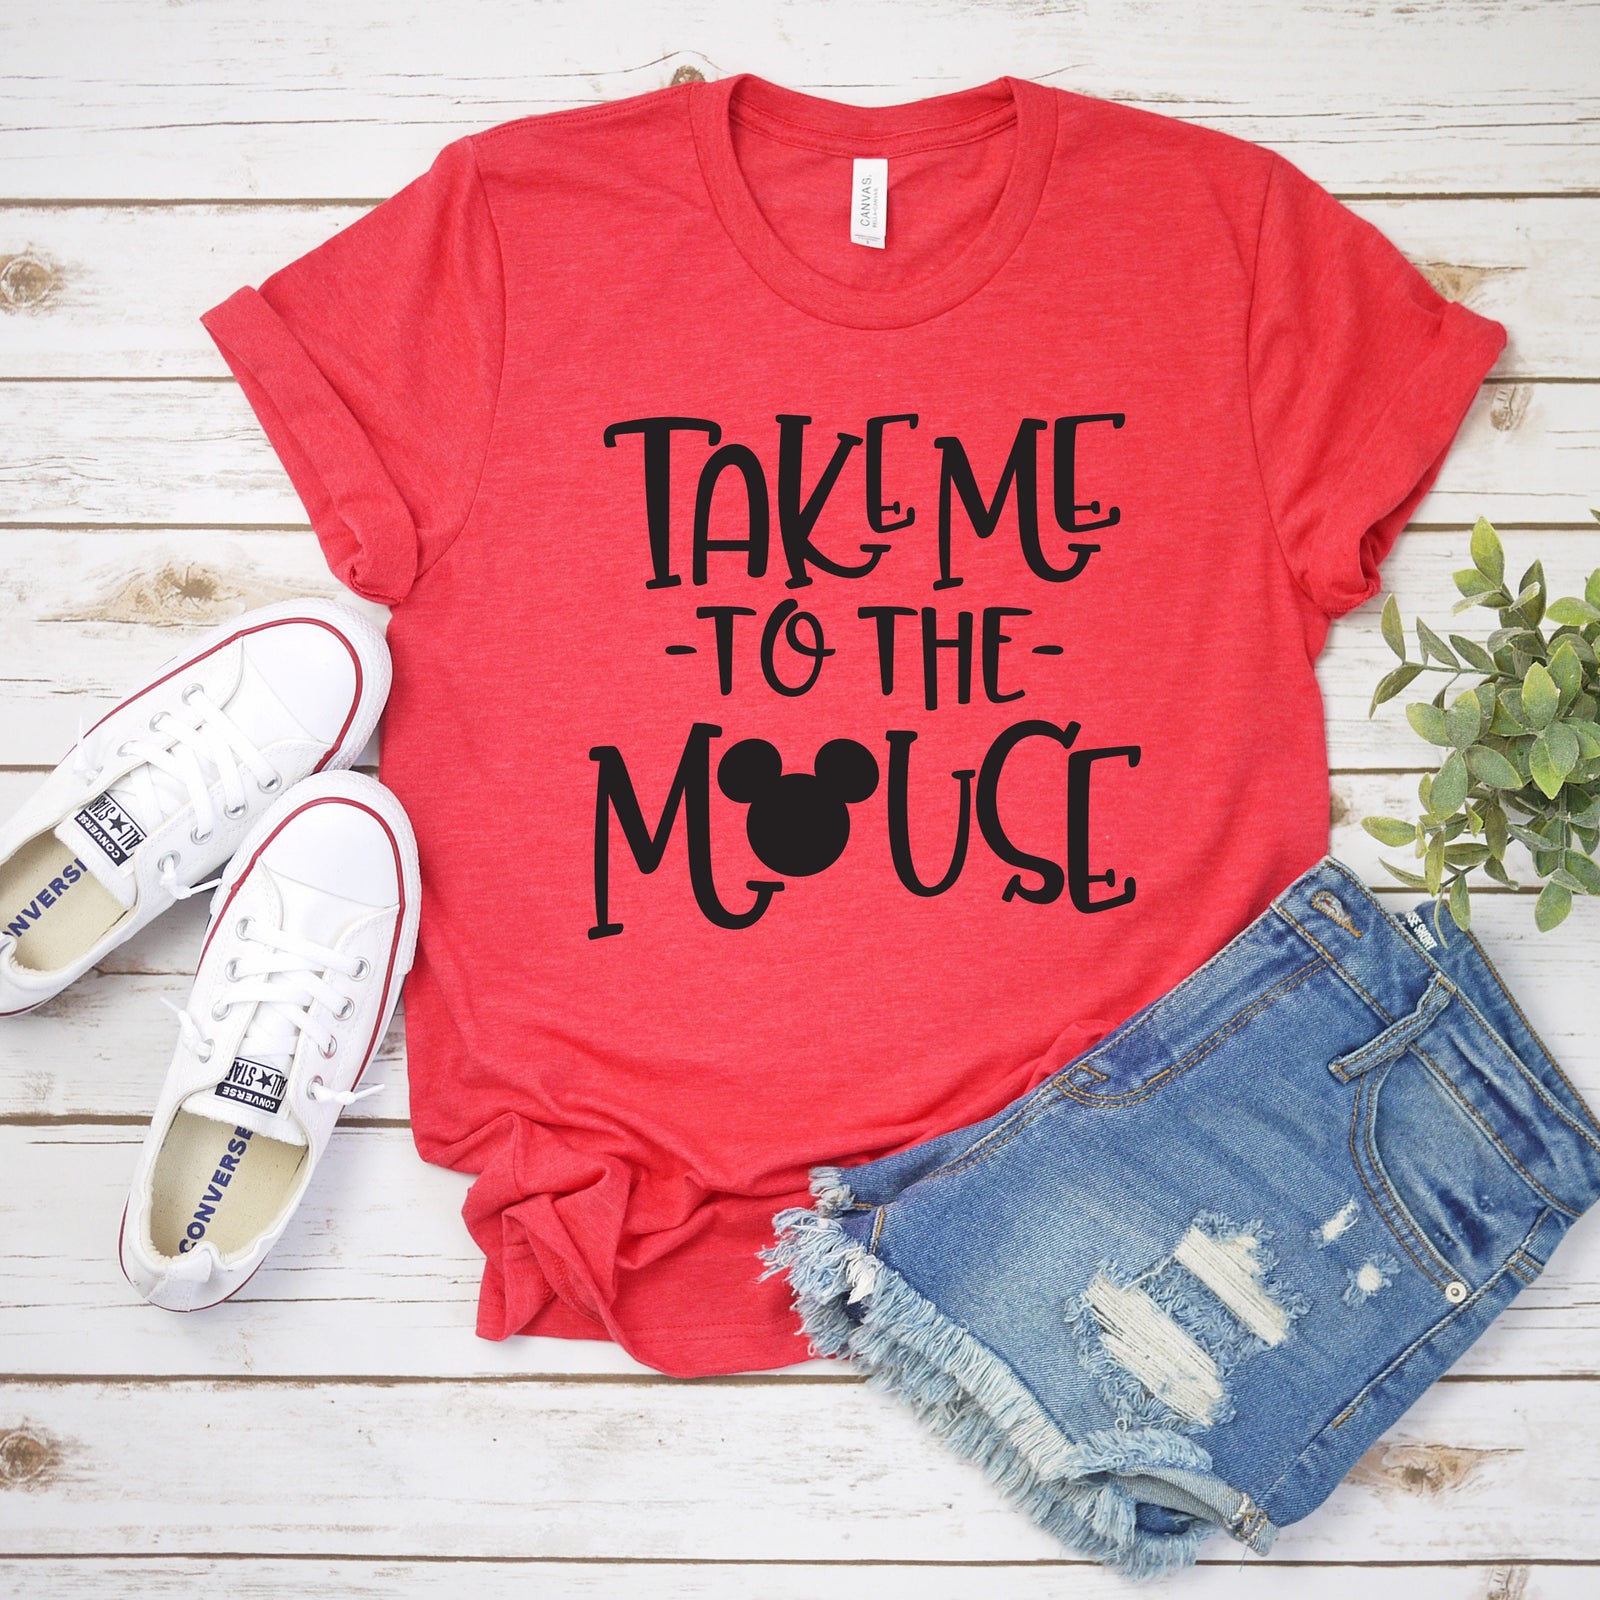 Take Me to the Mouse Adult Unisex T Shirt - Mickey Mouse t shirt - Headed to Disney - Disney Trip Matching Shirts